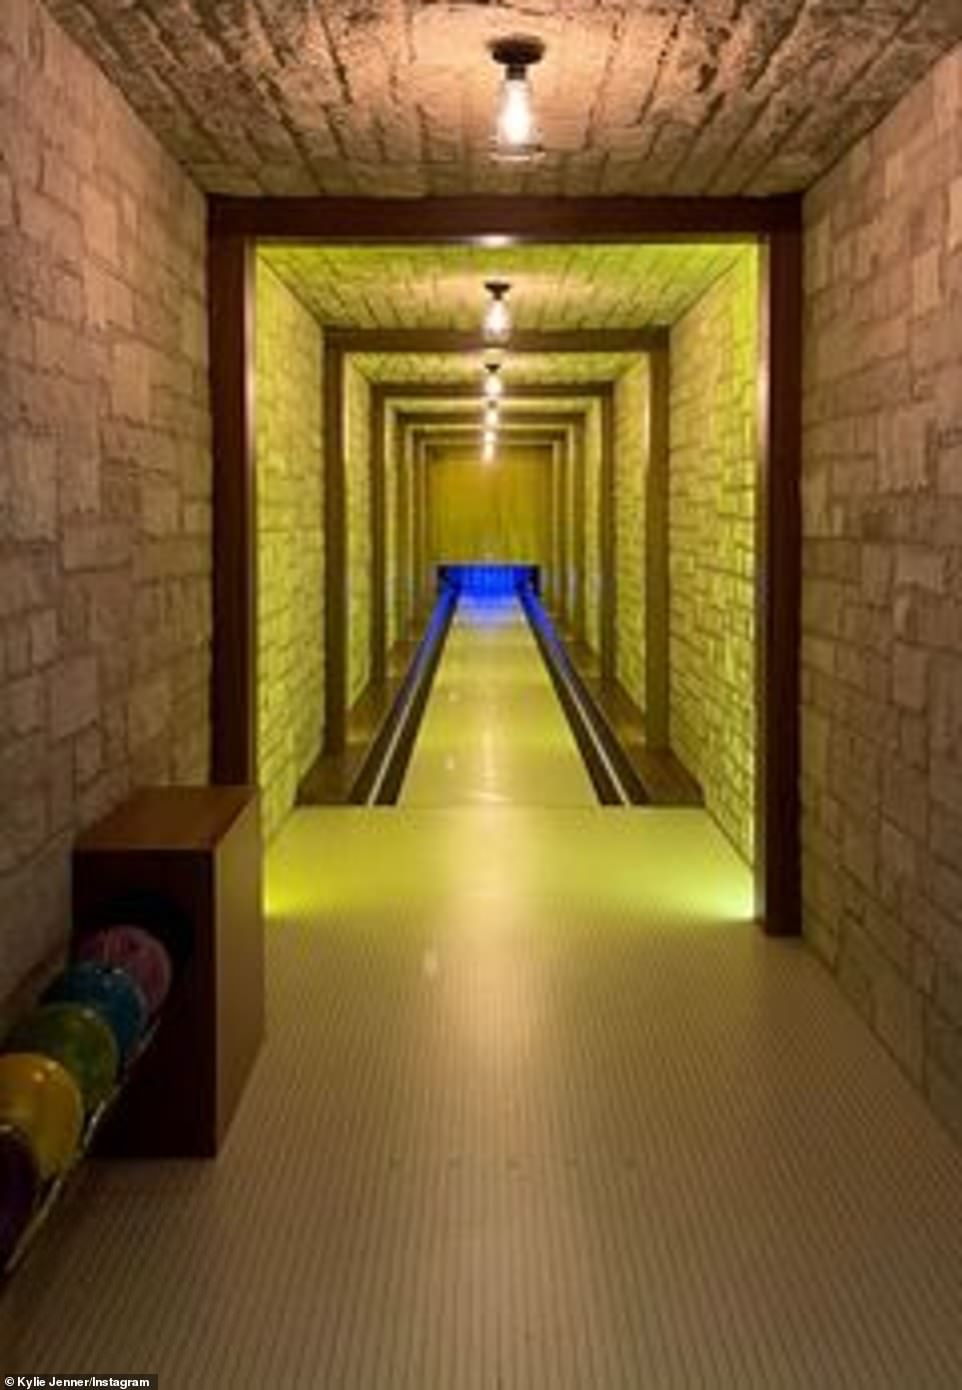 Playing a round: She also showed off the long stone corridor with the bowling alley